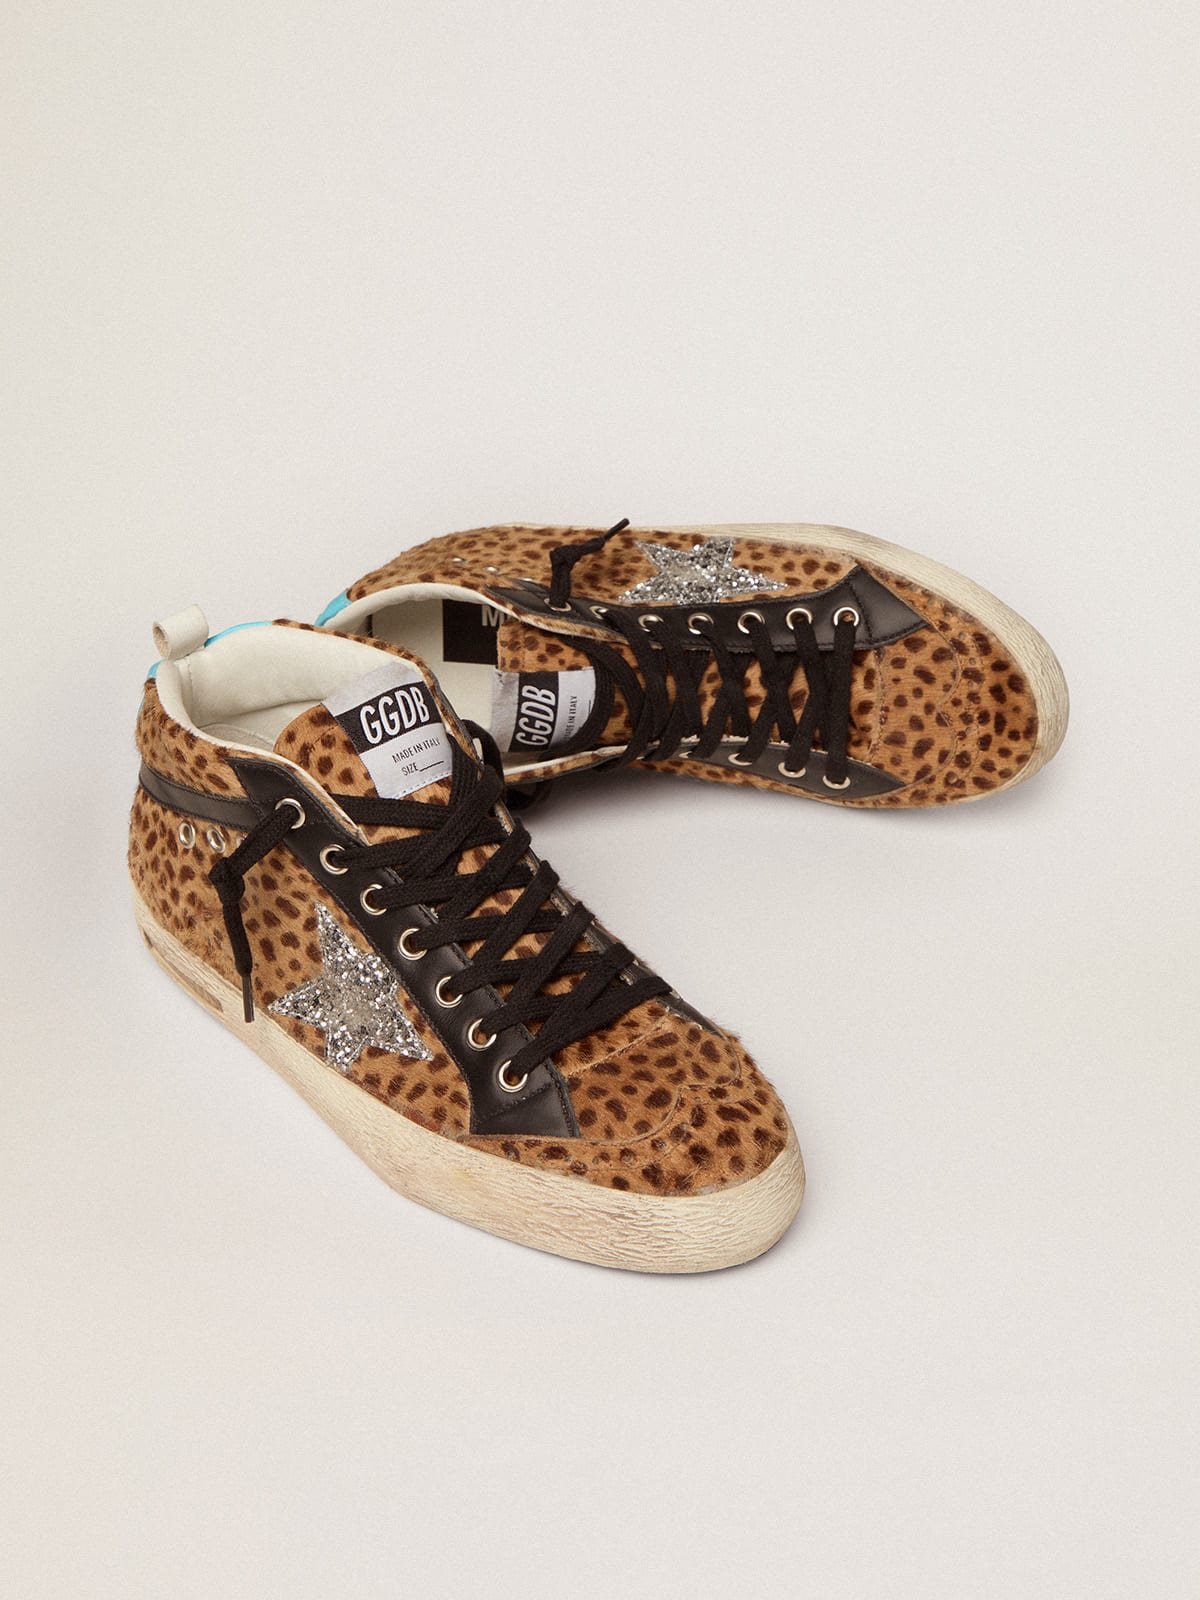 Golden Goose - Women's Mid Star in pony skin with animal print and silver star in 